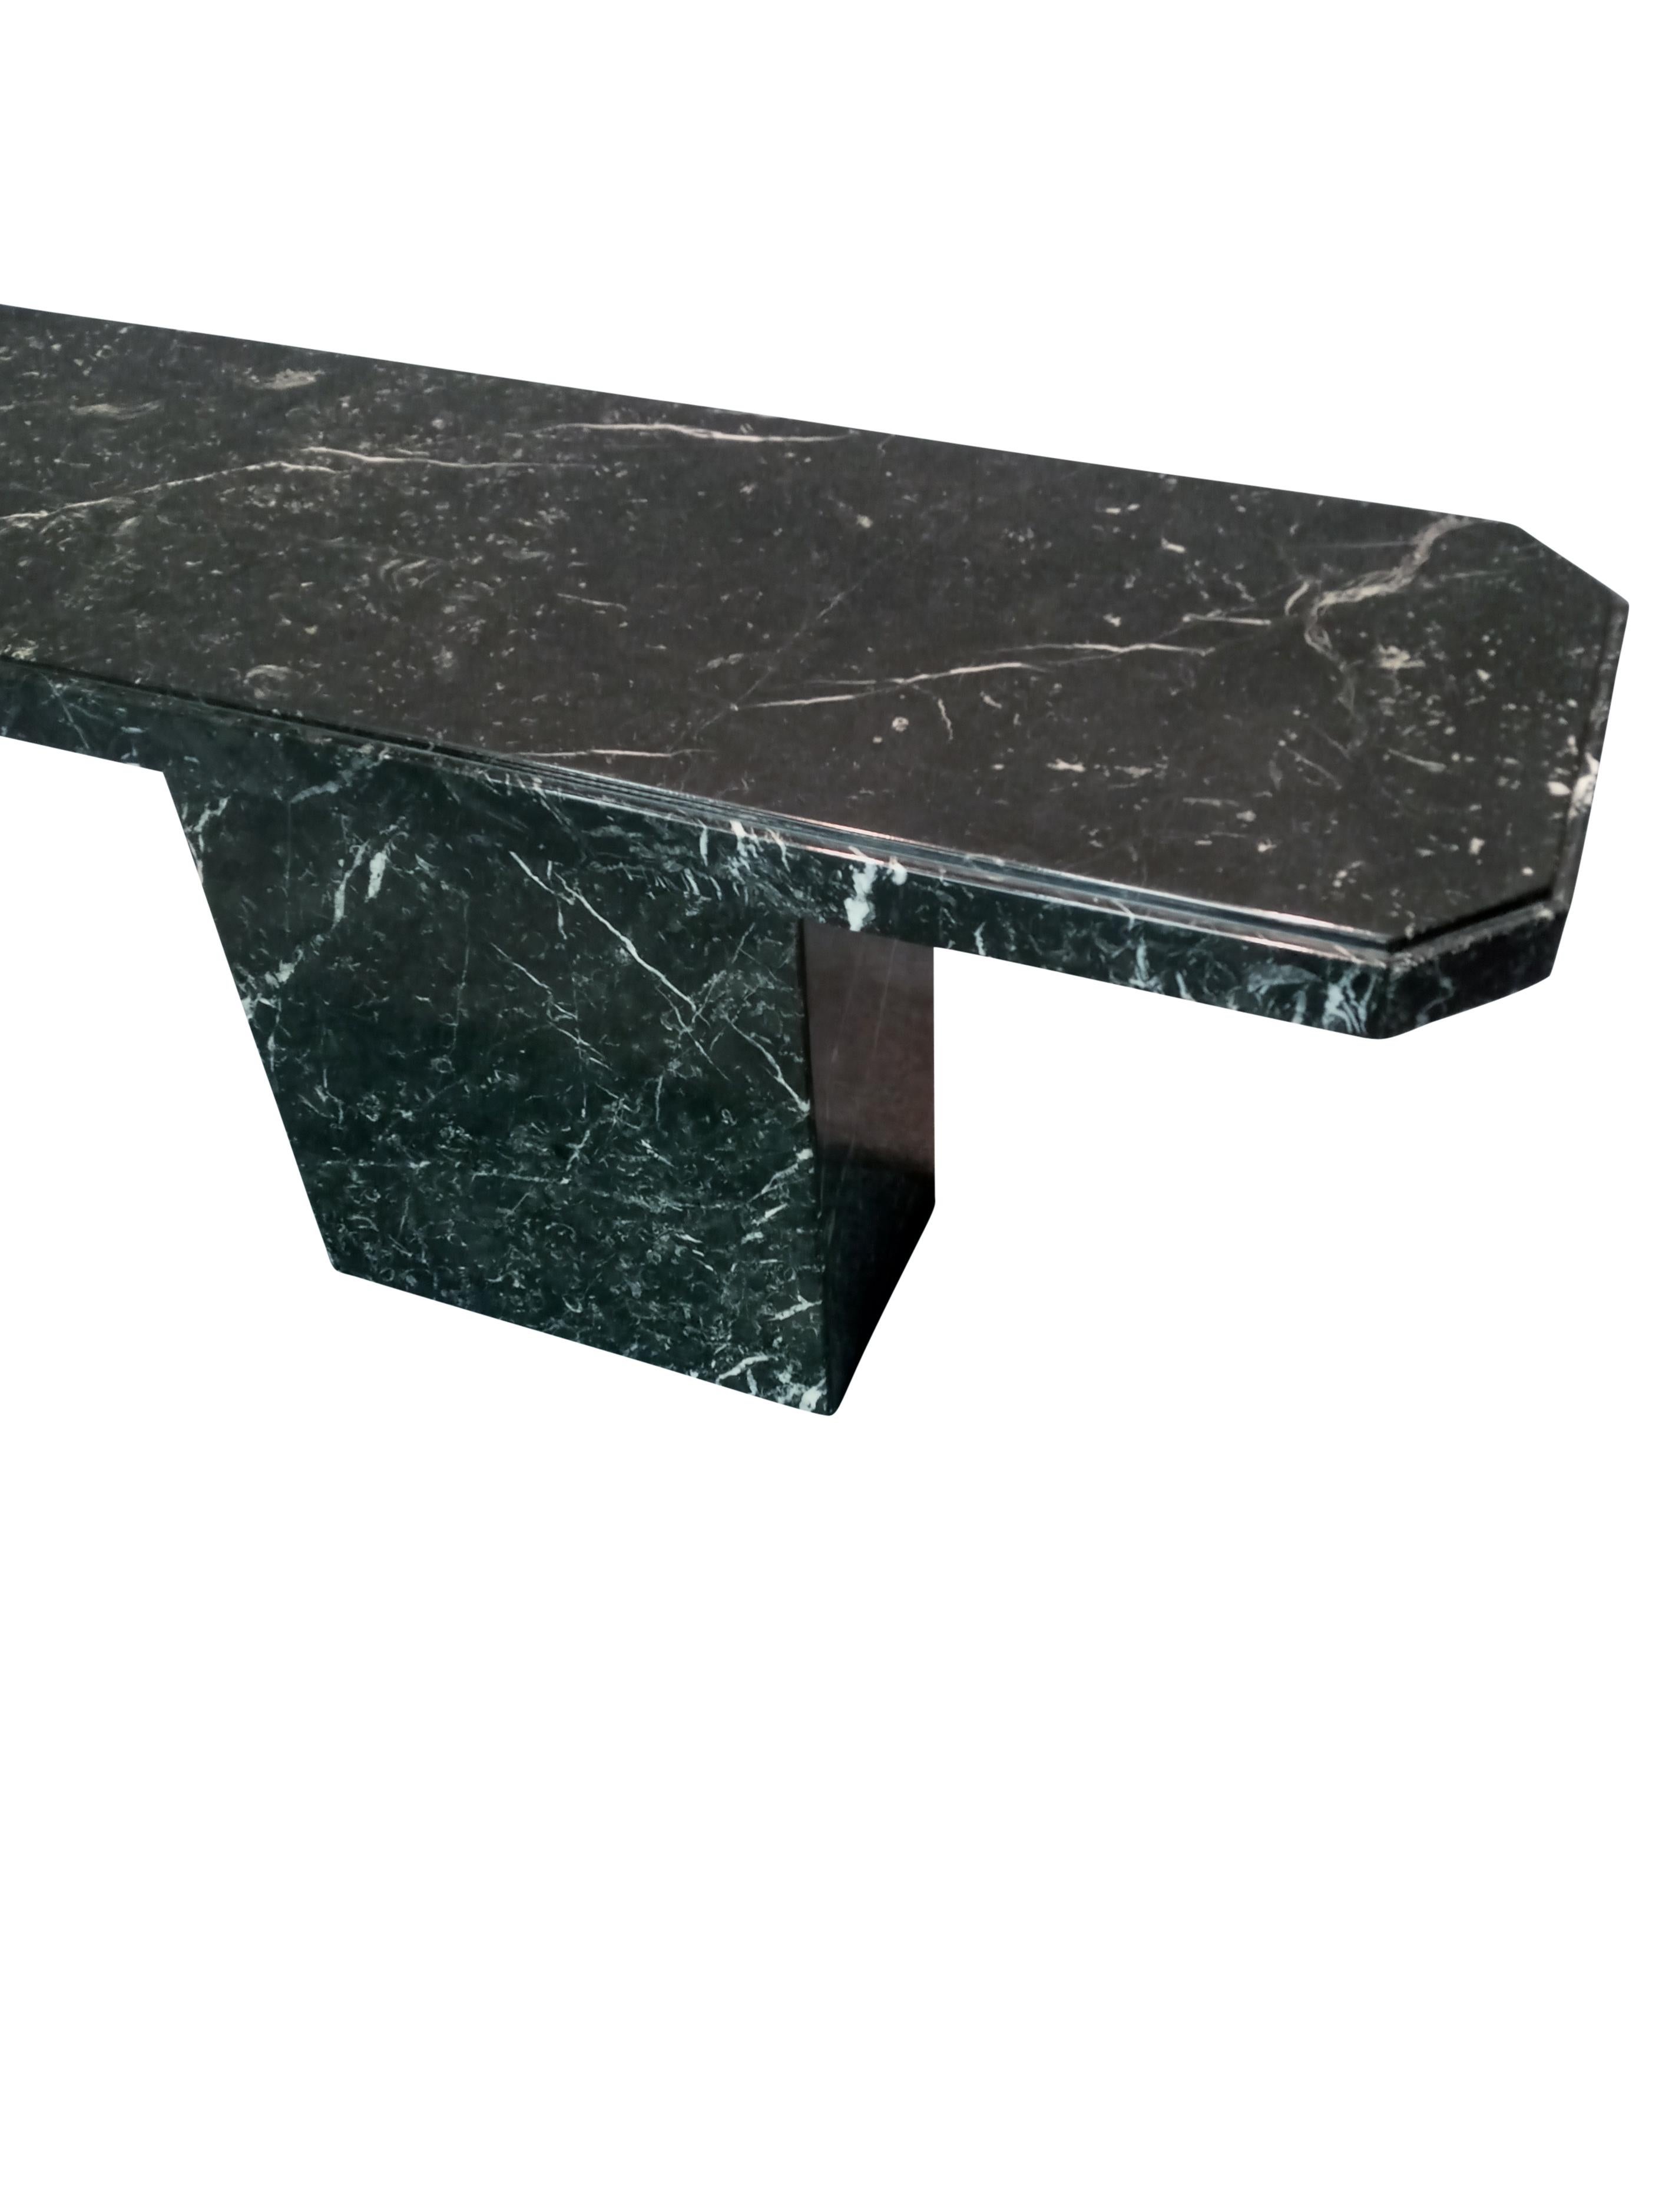 Late 20th Century Italian Post-Modern Elegant Console Table by Ello in Exotic Nero Marquina Marble